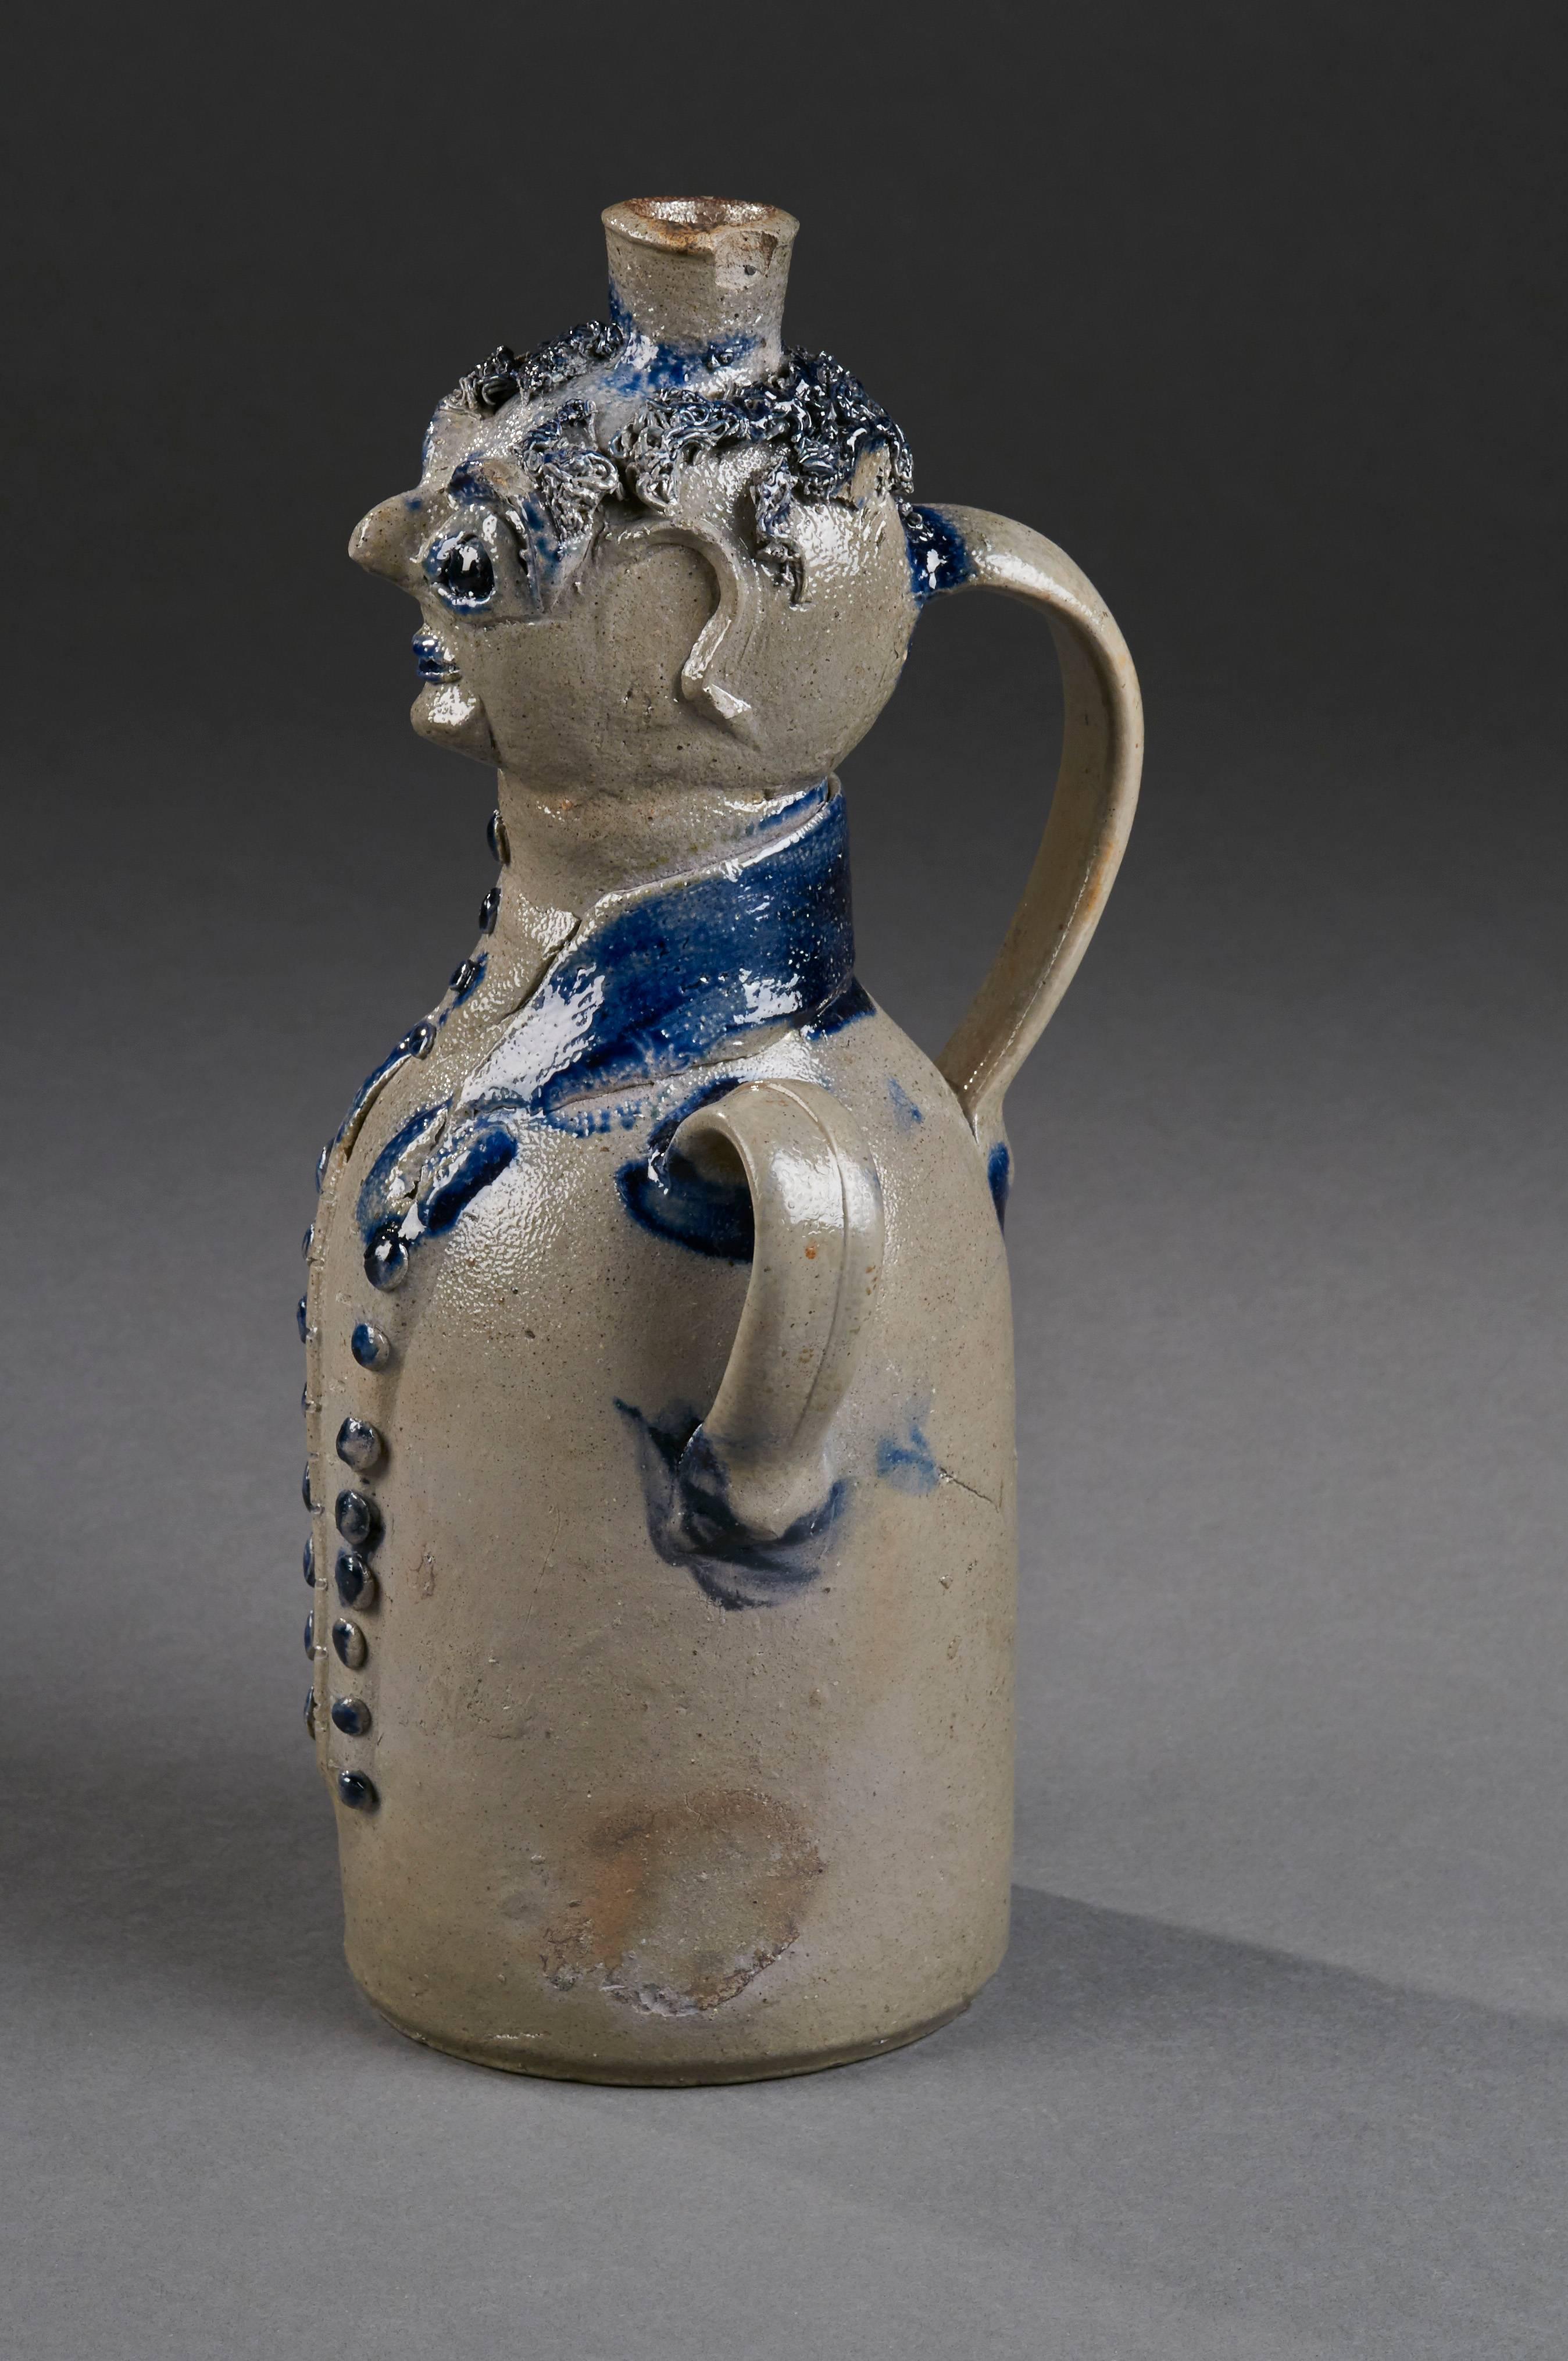 Mid-Atlantic, circa 1850, stoneware with cobalt and applied decoration
Measures: H 13”.

Extremely rare form with imaginative interpretation of a man in a cutaway coat.
 